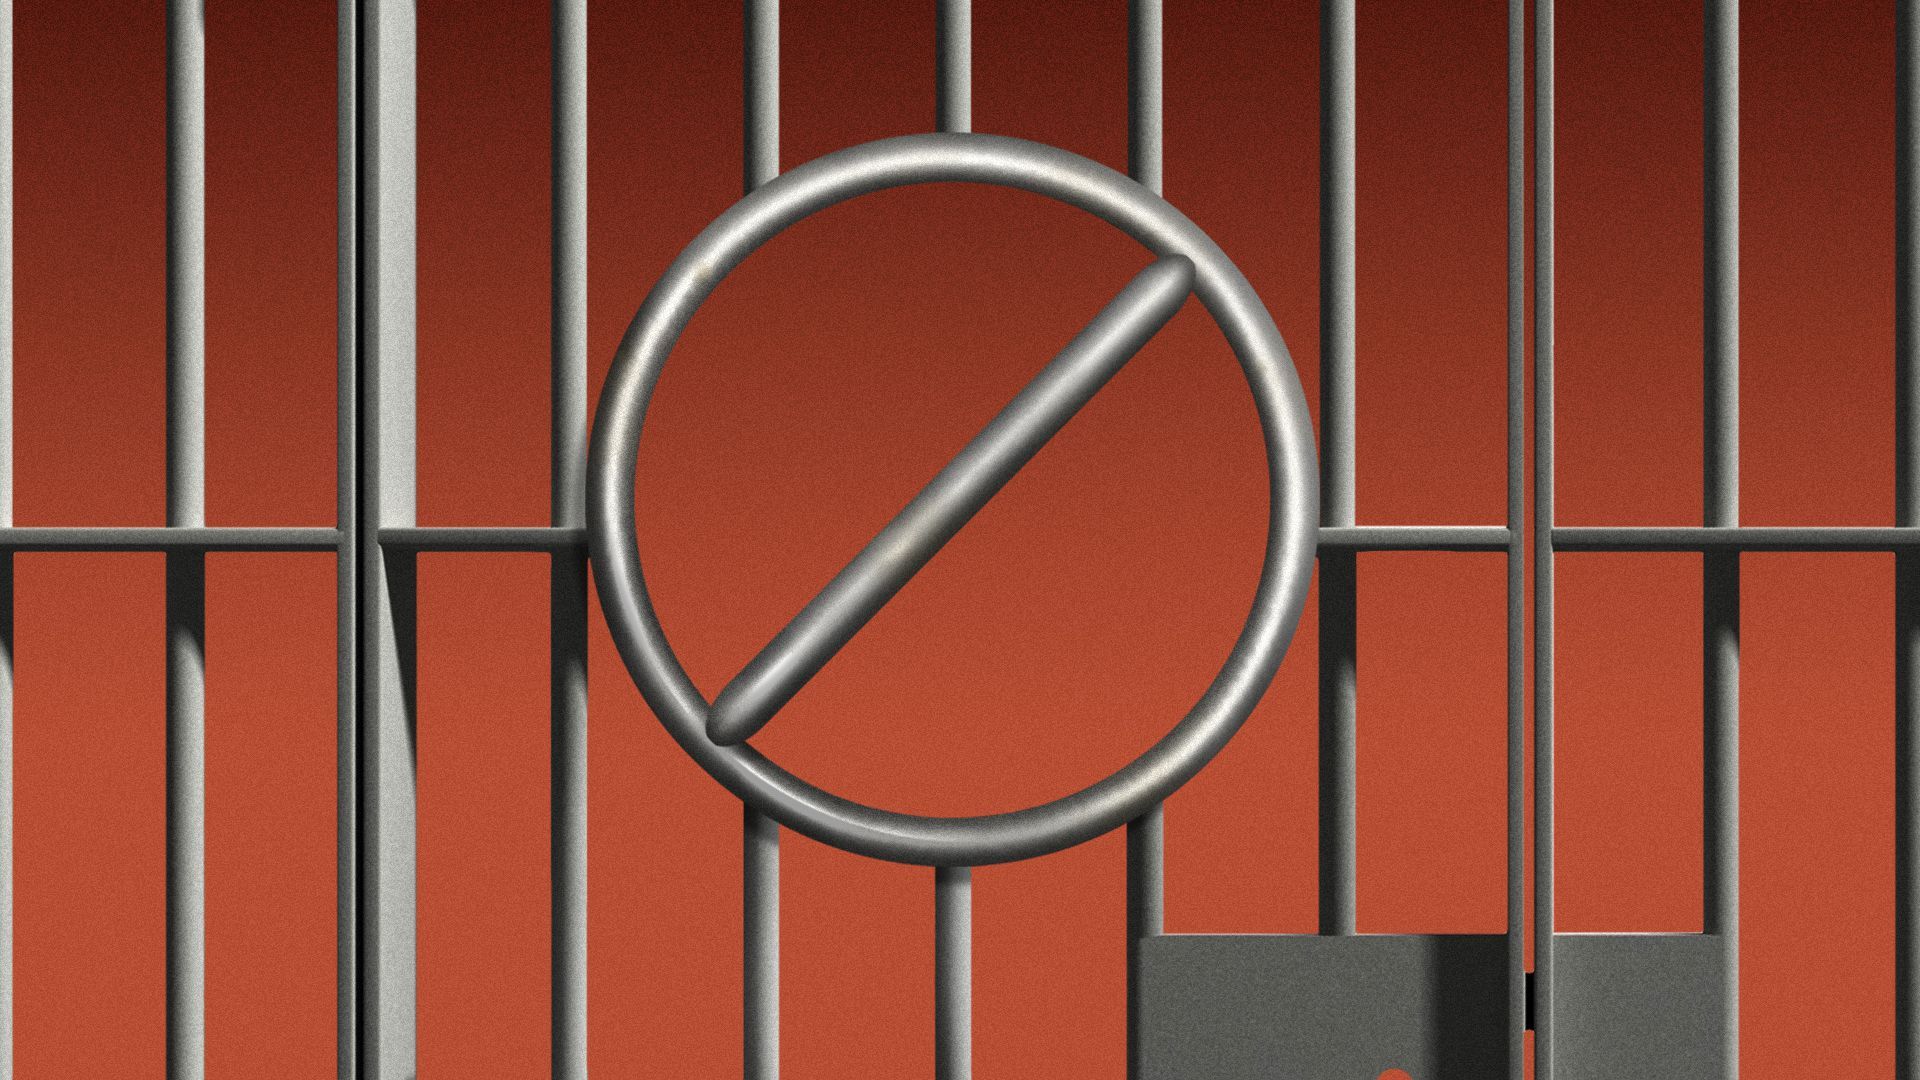 Illustration of the "No" symbol merged with jail cell bars.